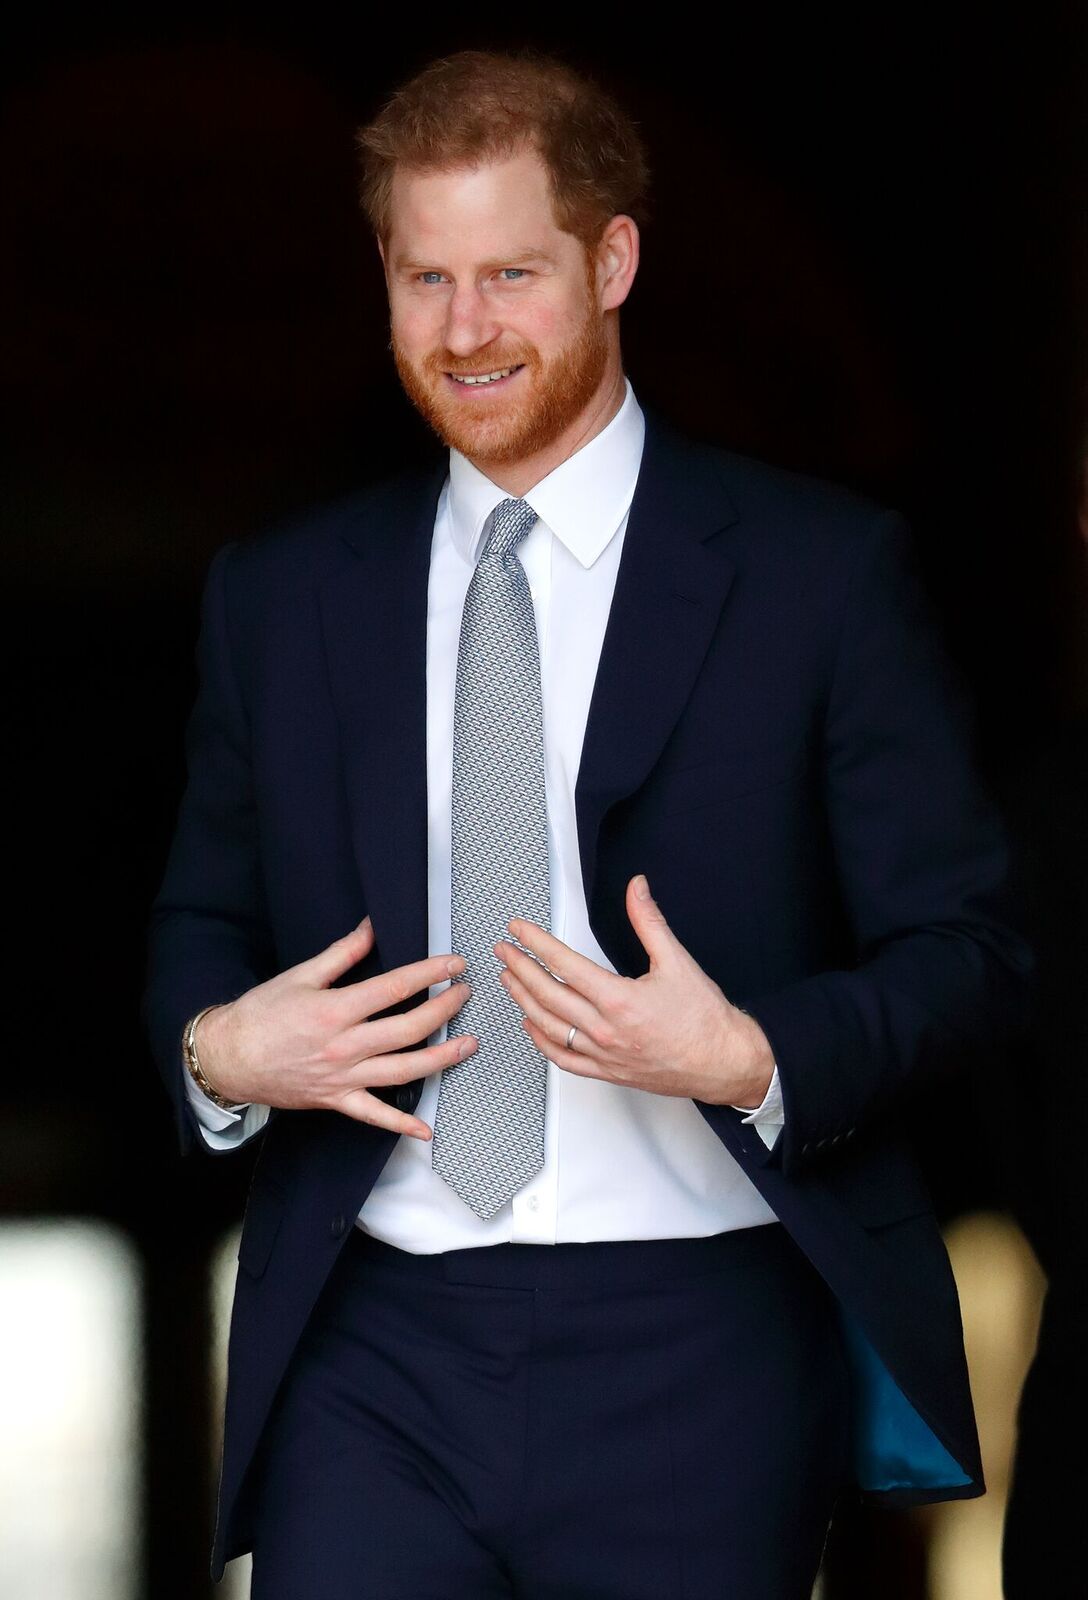 Prince Harry hosts the Rugby League World Cup 2021 draws for the tournaments at Buckingham Palace on January 16, 2020, in London, England Photo: Max Mumby/Indigo/Getty Images